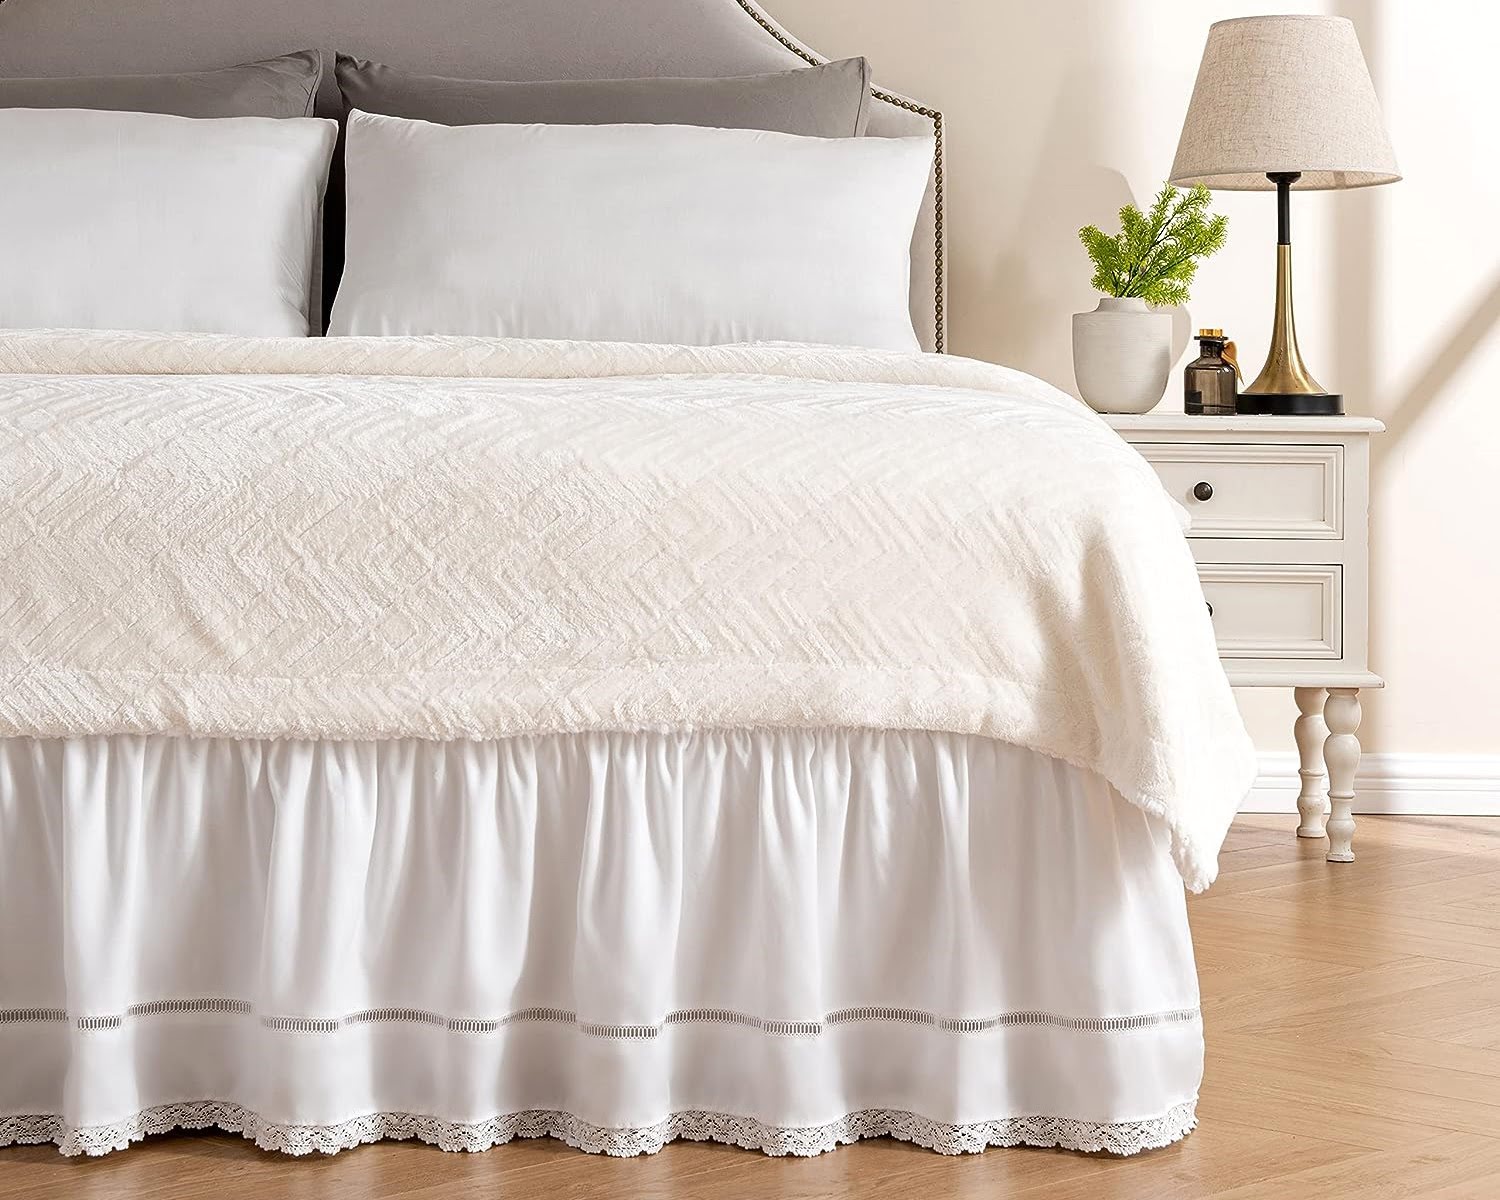 How To Keep A Bed Skirt In Place